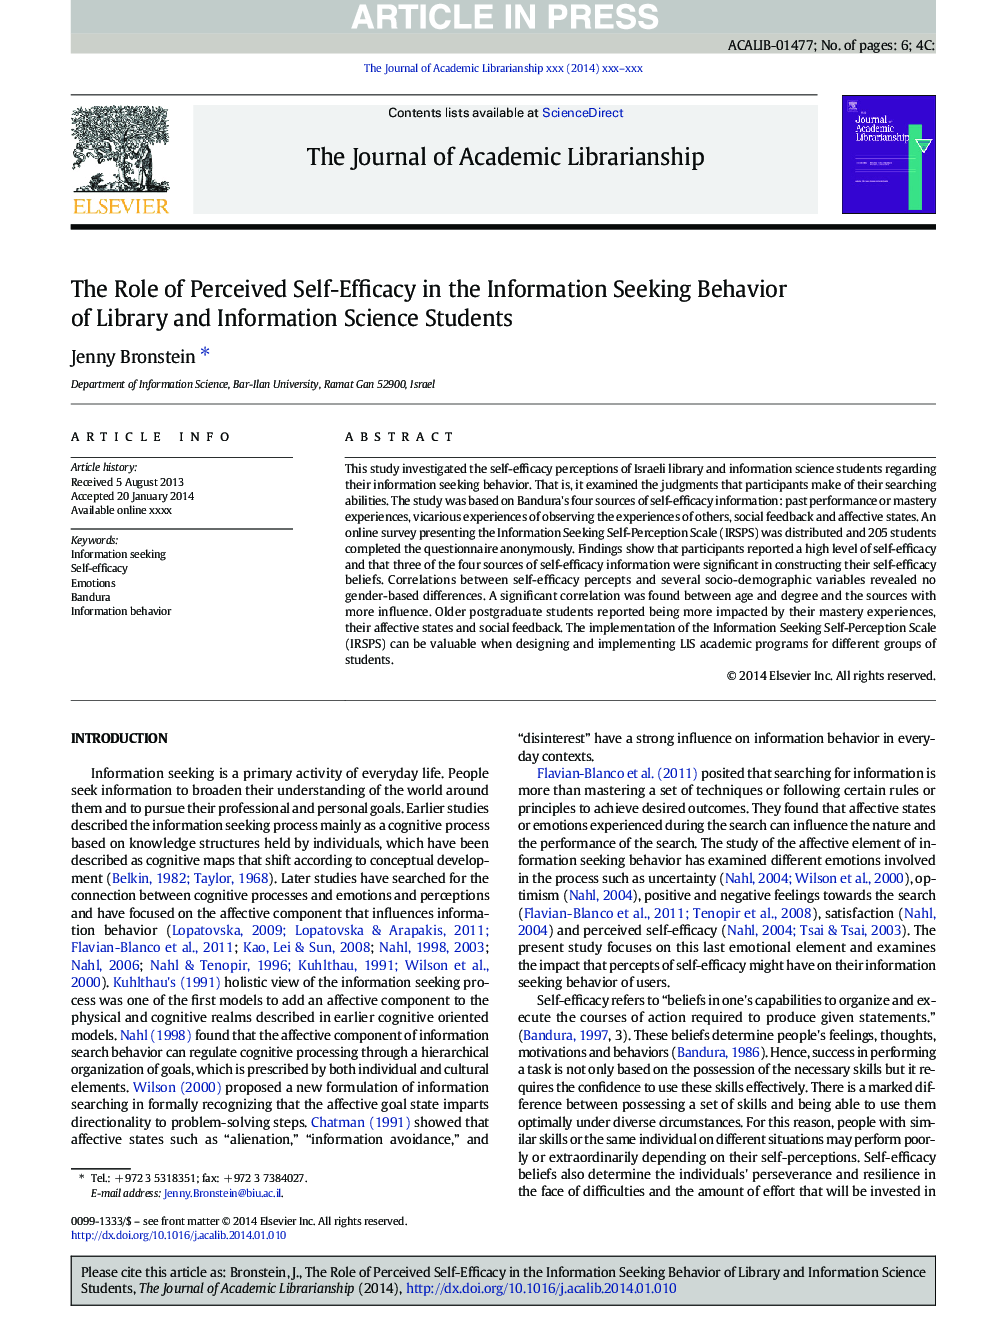 The Role of Perceived Self-Efficacy in the Information Seeking Behavior of Library and Information Science Students